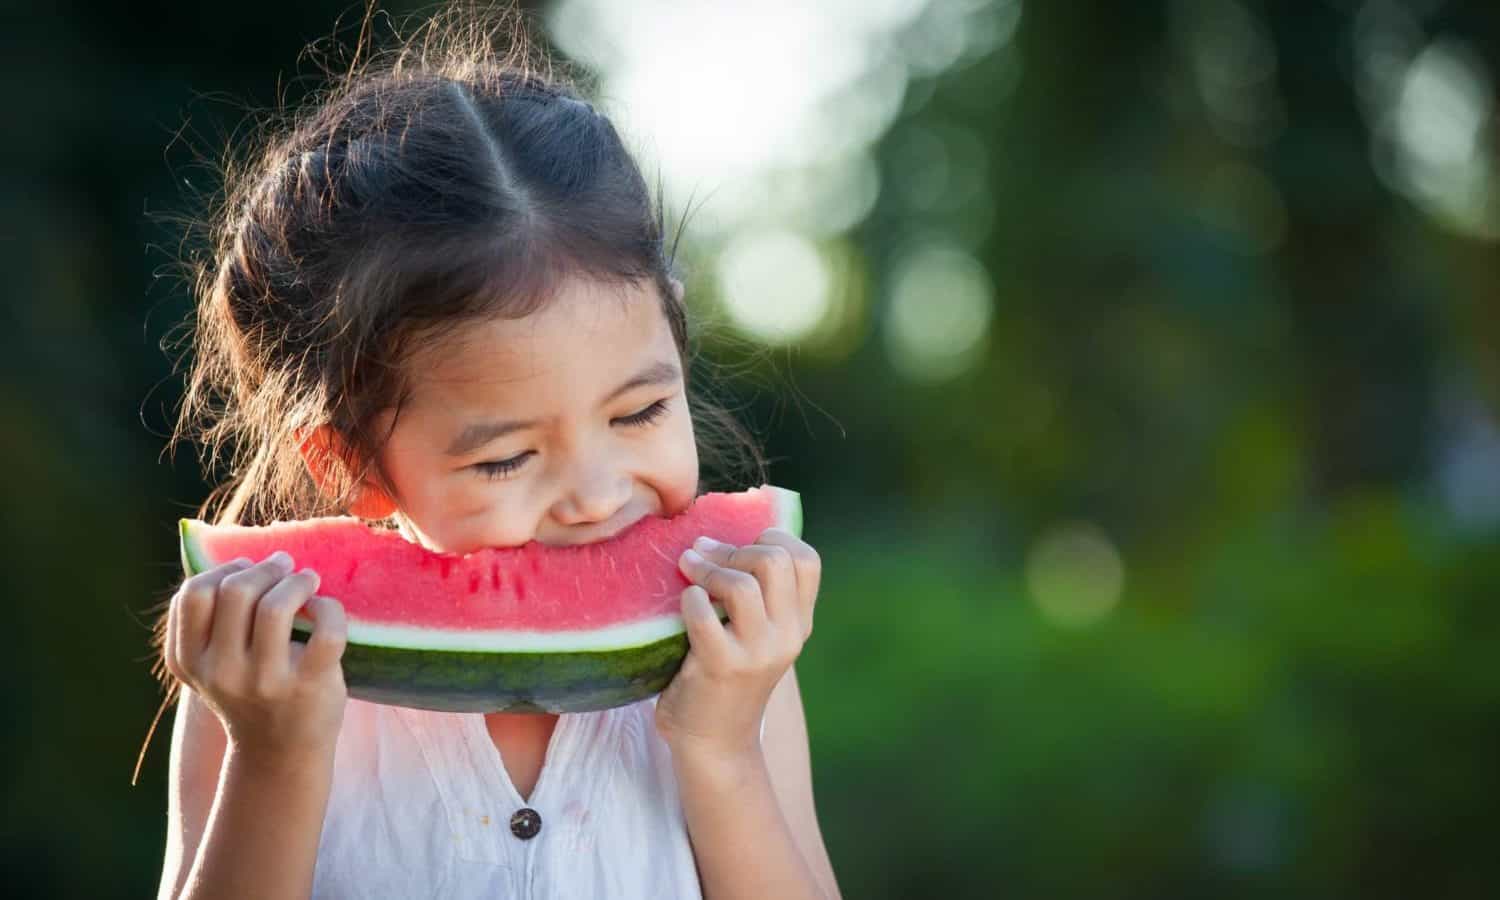 Learning healthy food habits at a young age decreases the chance of health problems in adulthood.